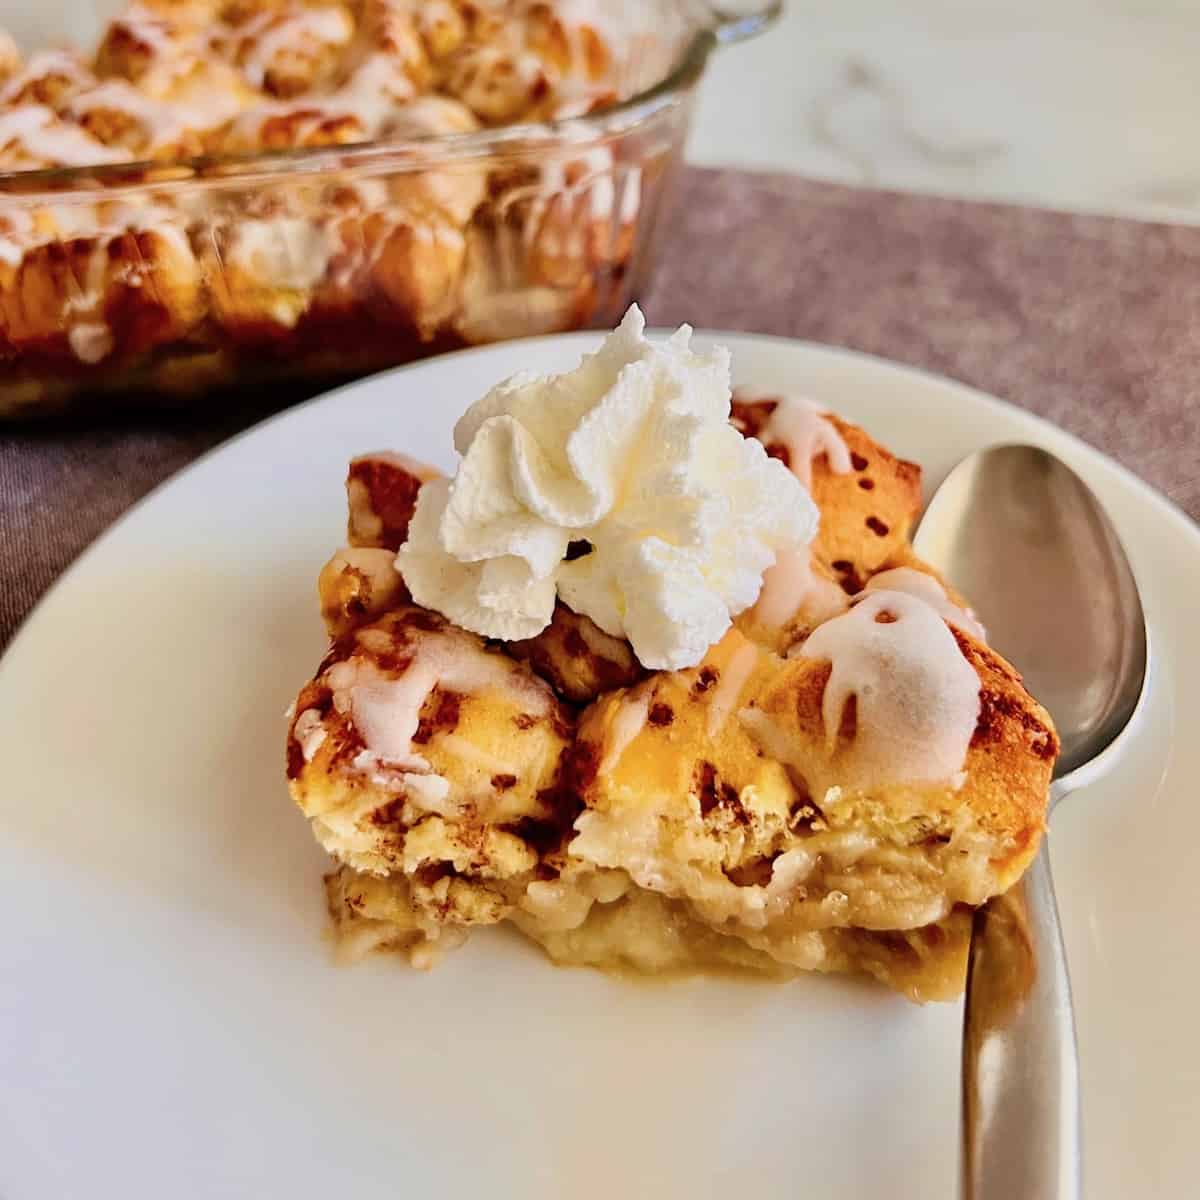 Cinnamon Roll Peach Cobbler topped with a dollop of canned whipped cream.